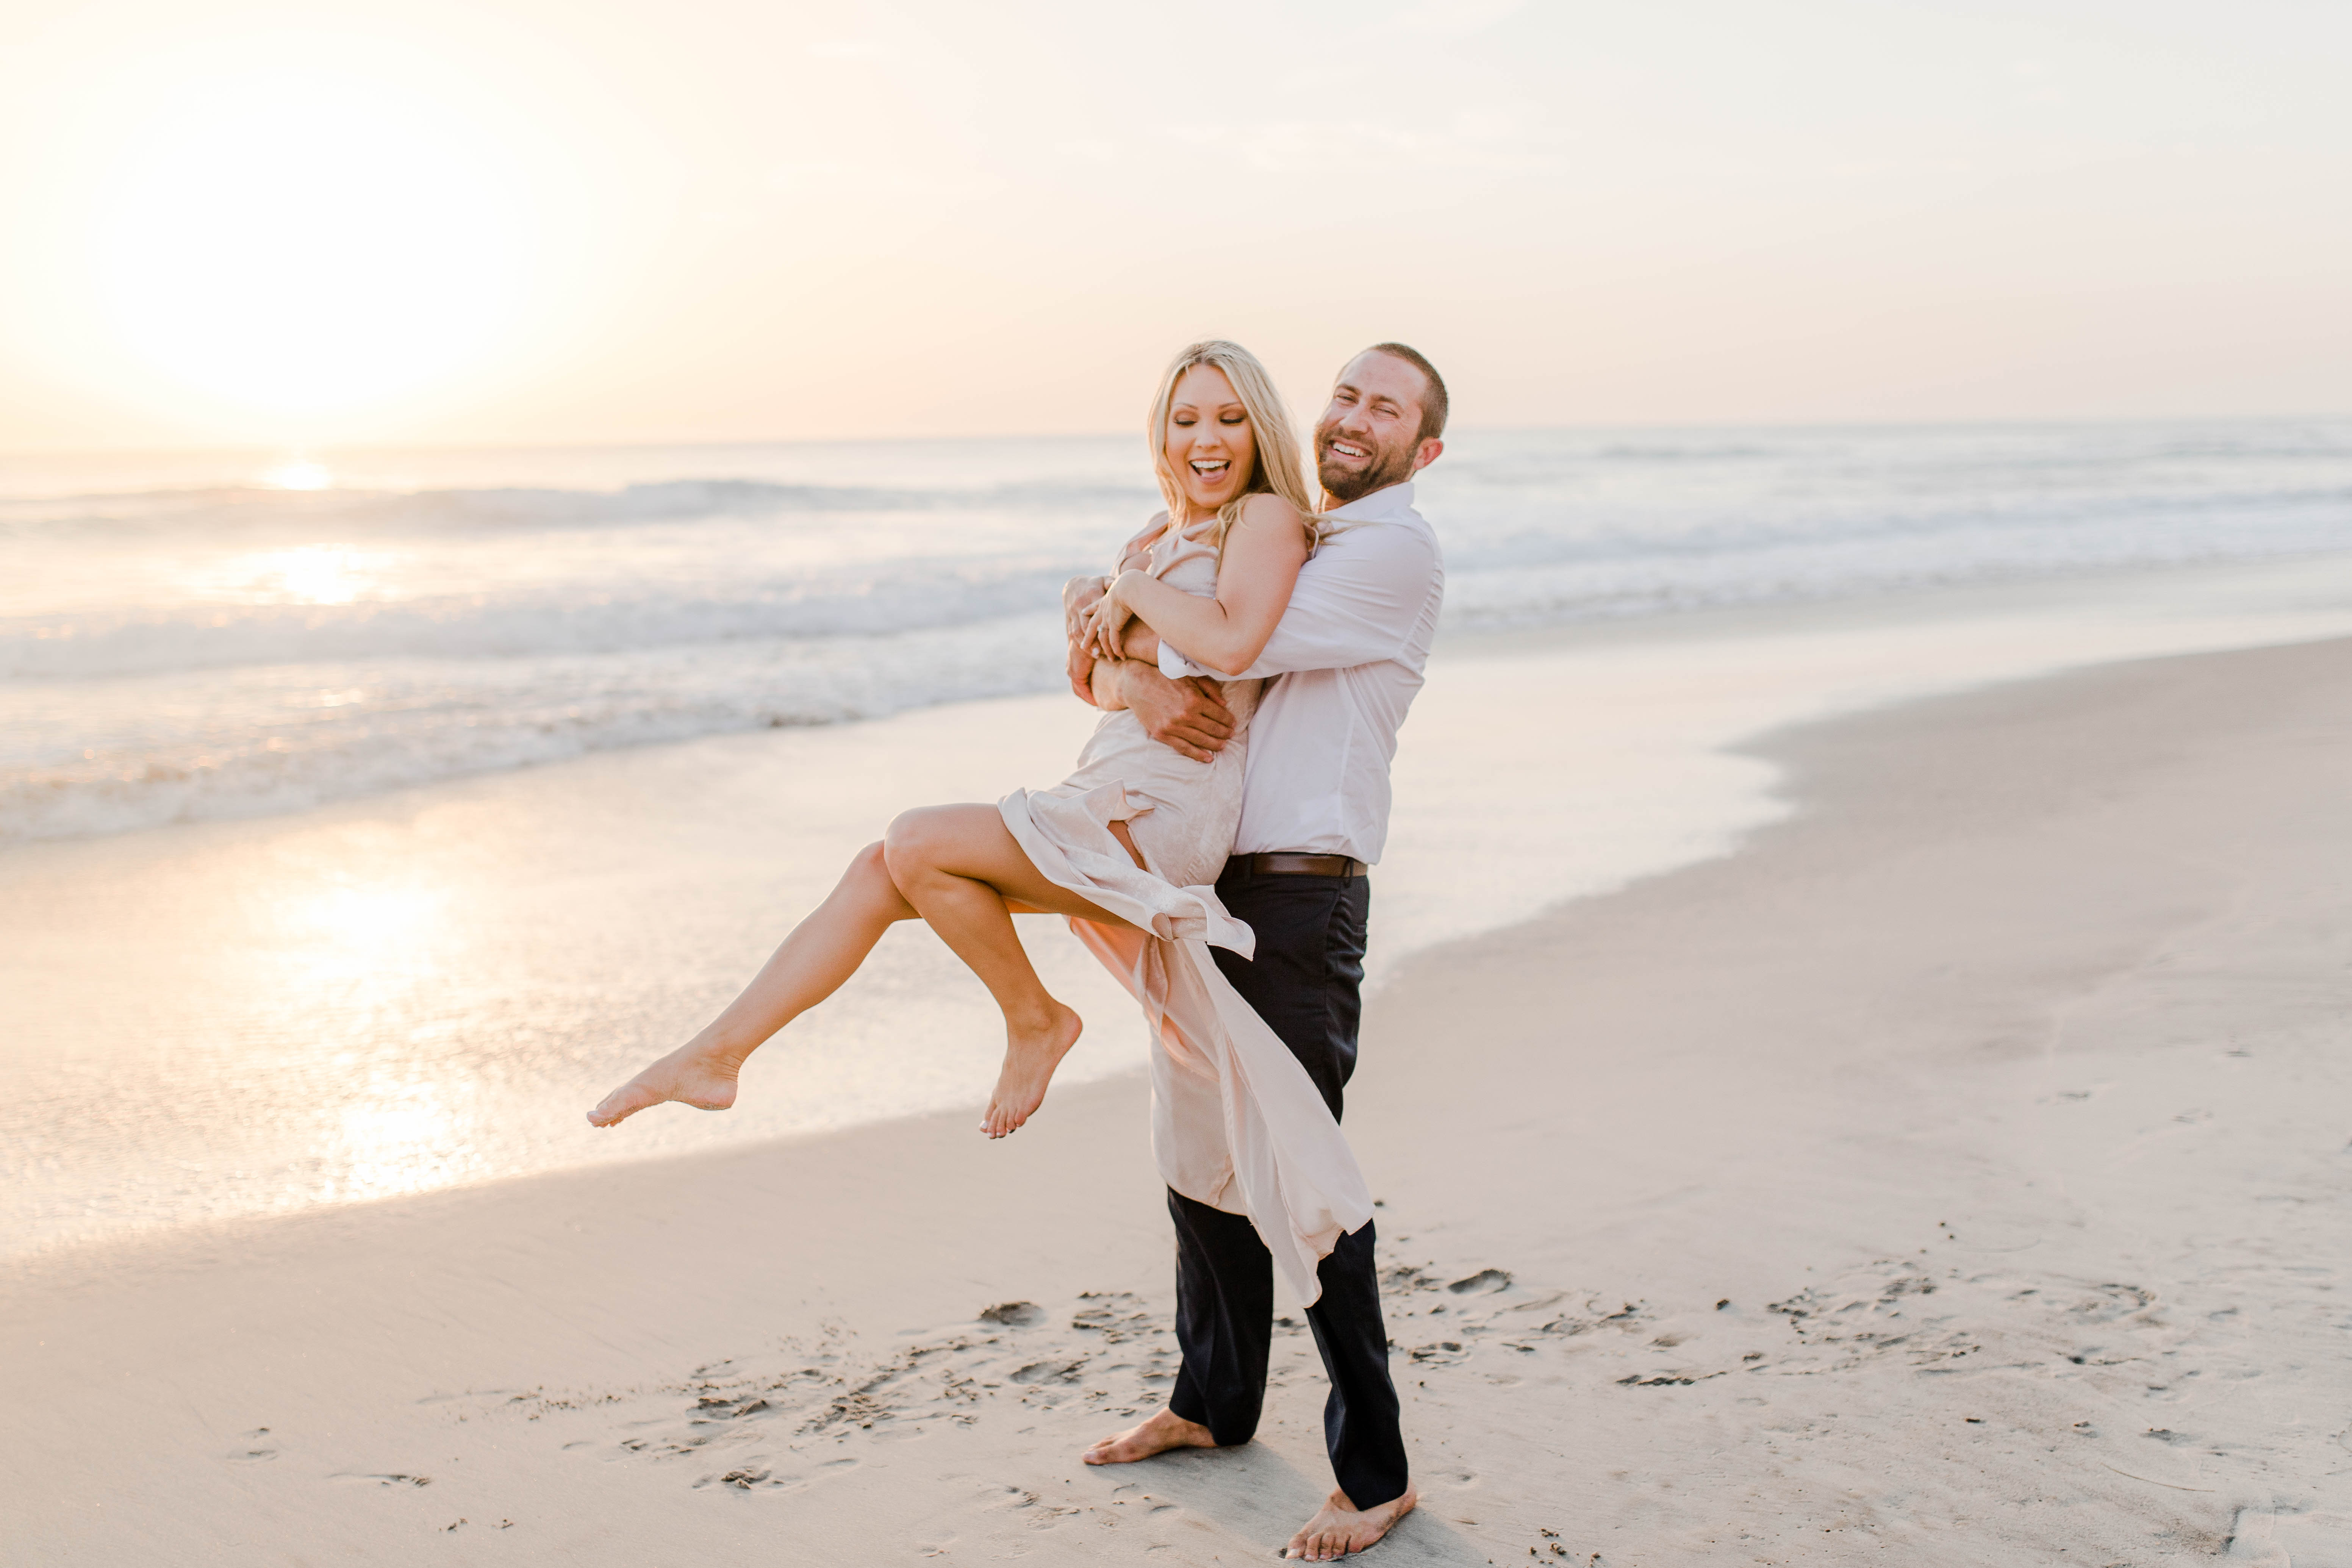 Blacks Beach Engagement Session by Bree and Stephen Photography - San Diego Wedding Photography by Bree and Stephen Photography - Torrey Pines Engagement